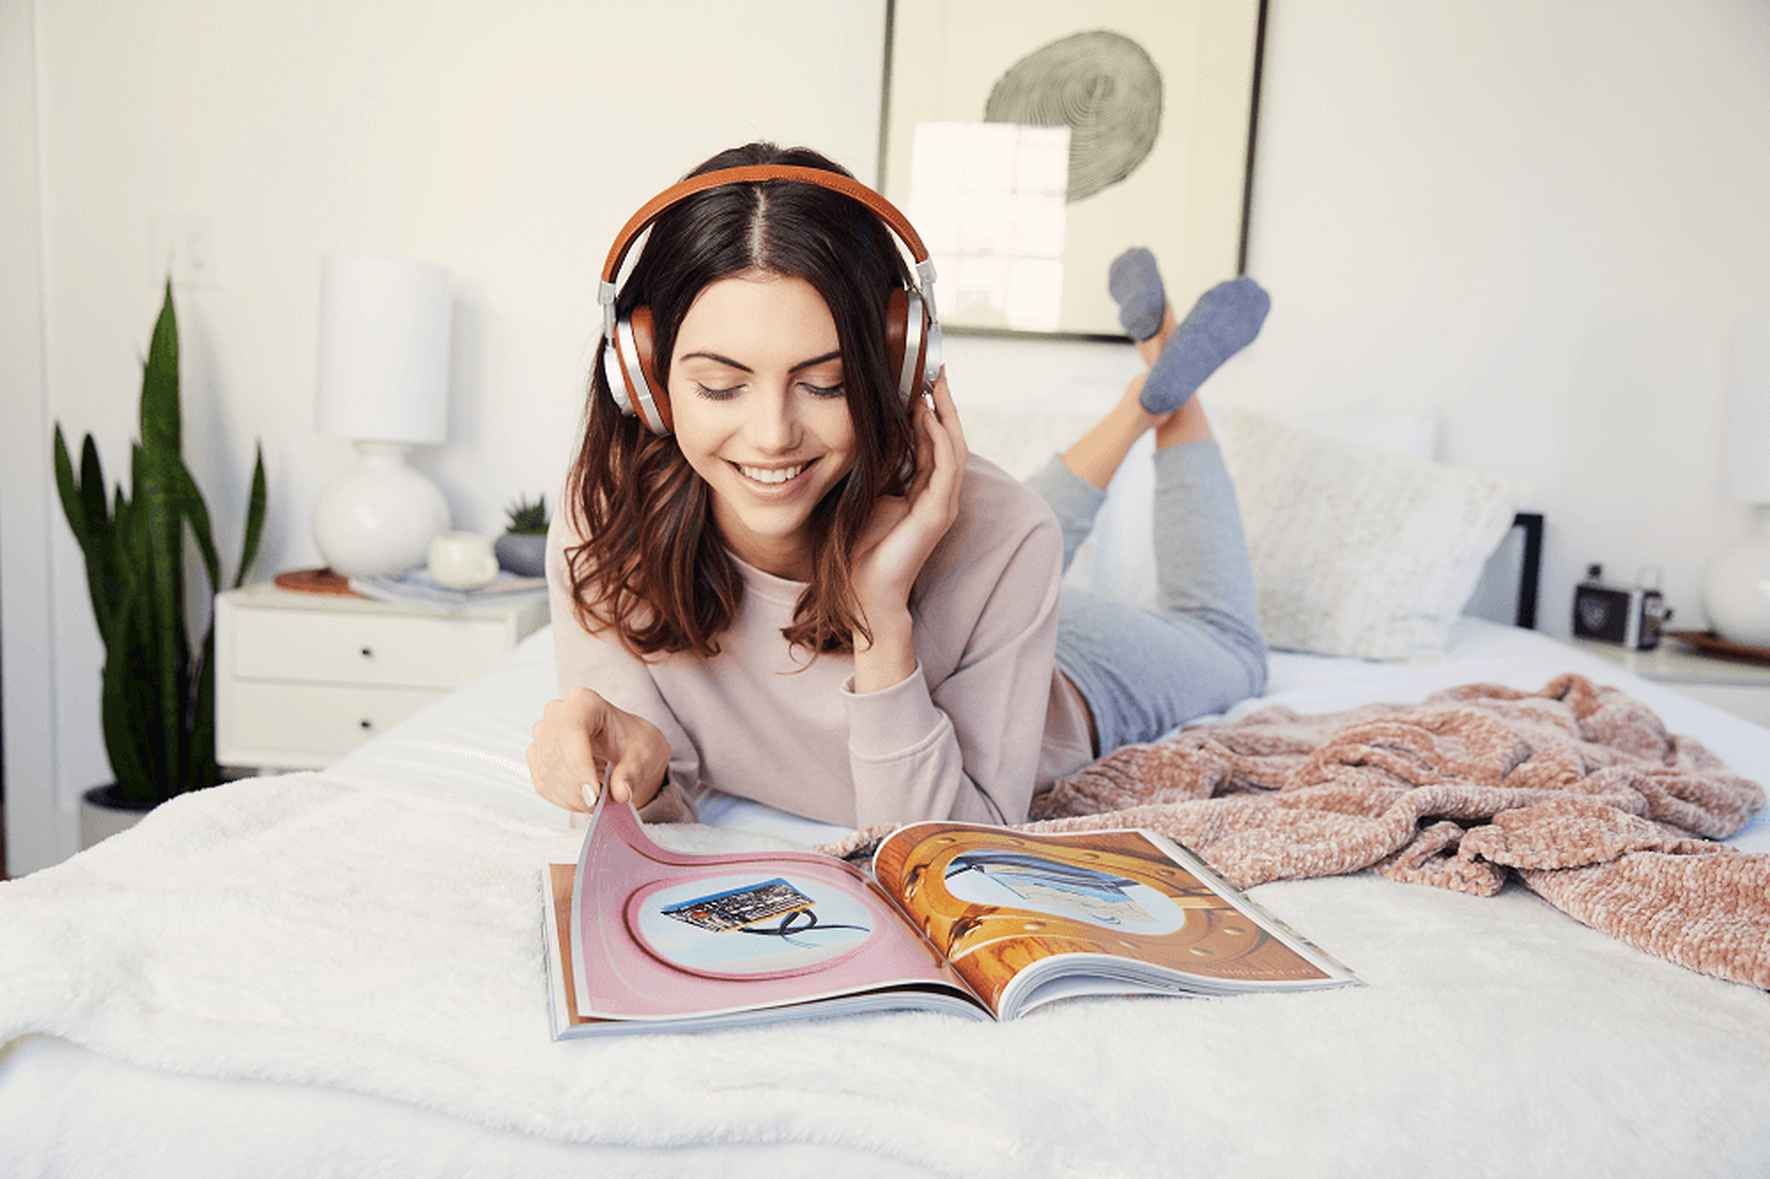 A woman wearing headphones is on her bed reading a magazine with the Peds™ logo in the center.